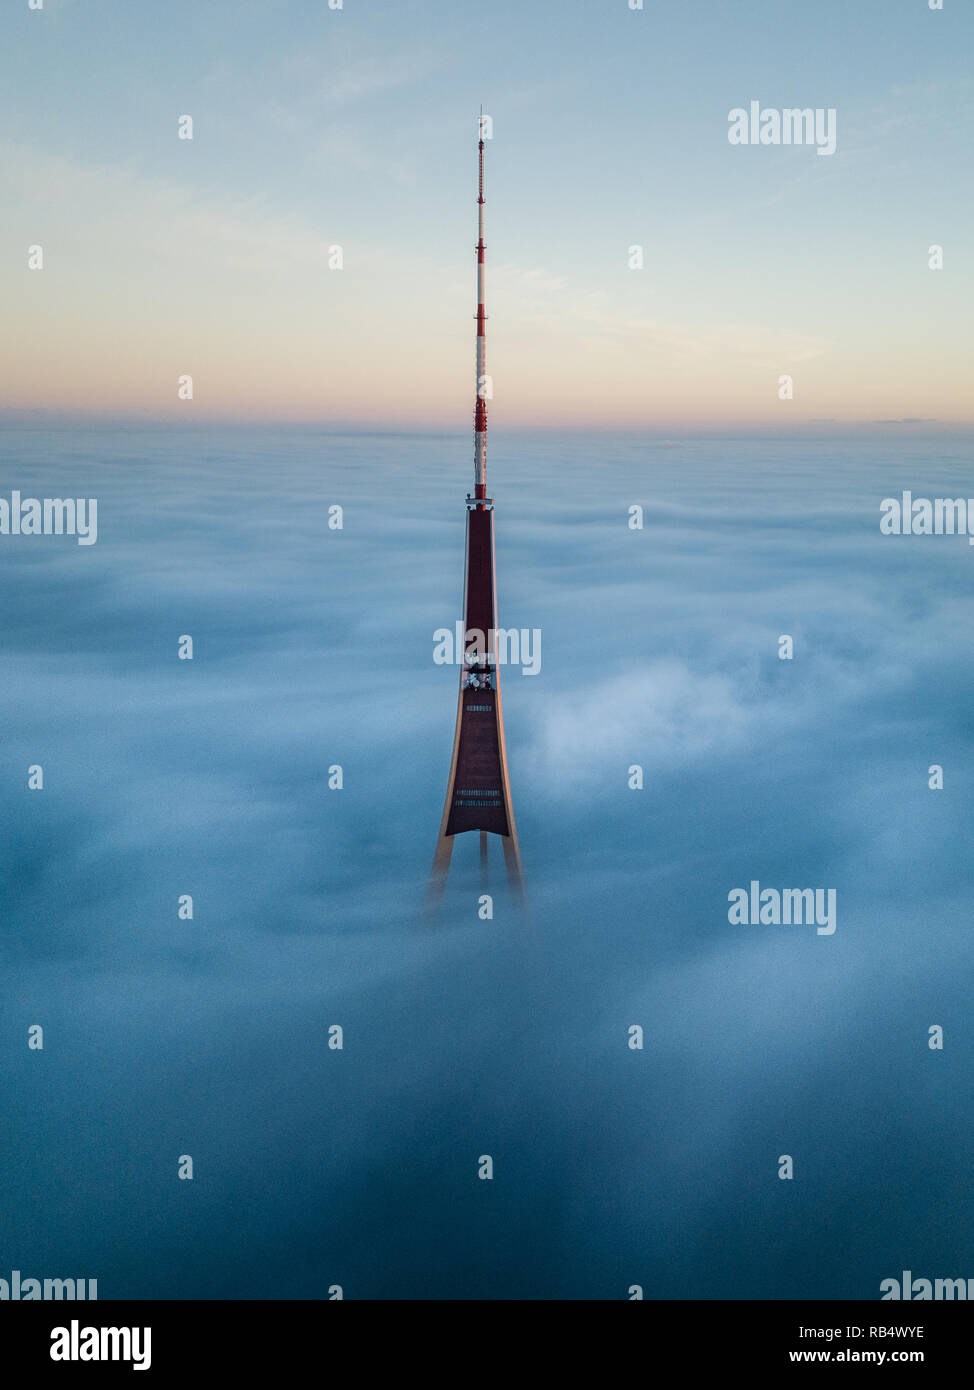 The Riga Radio and TV Tower in Riga, Latvia is the tallest tower in the  European Union. Tip sticking out of fog layer during beautiful sunrise  Stock Photo - Alamy